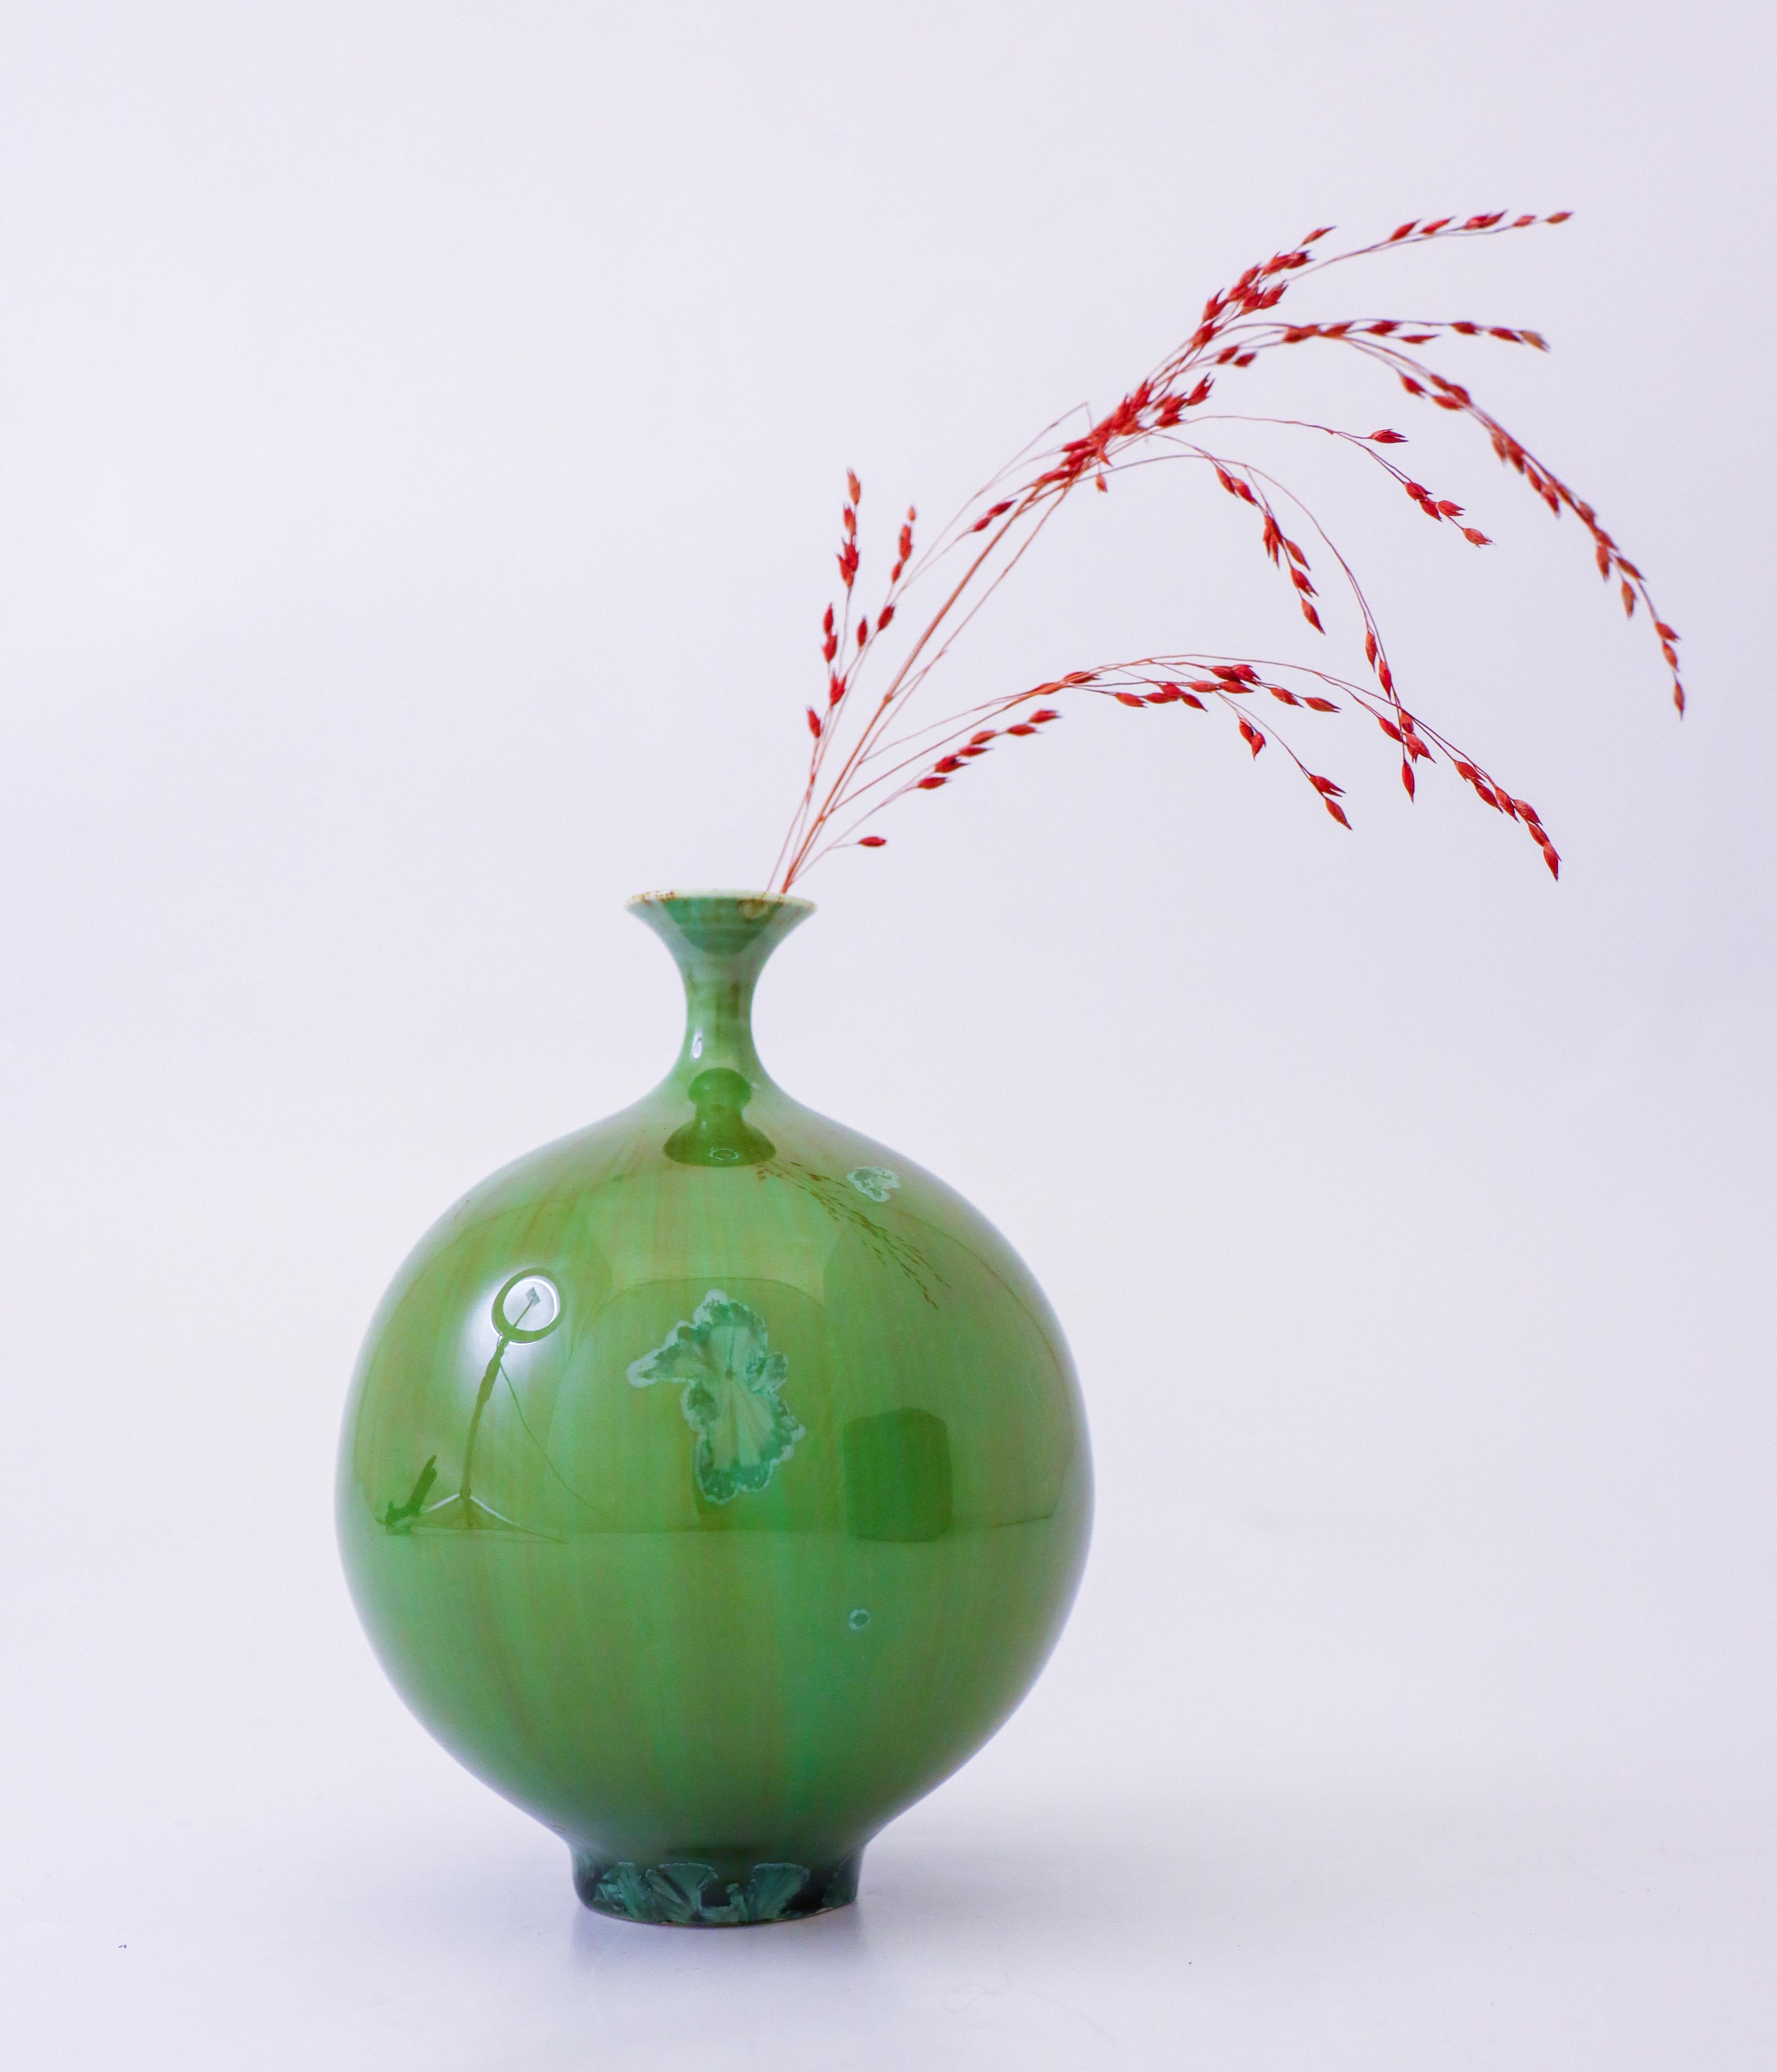 A beautiful green vase with a green crystalline glaze designed by Isak Isaksson in Sweden. The vase is 12.5 cm (5